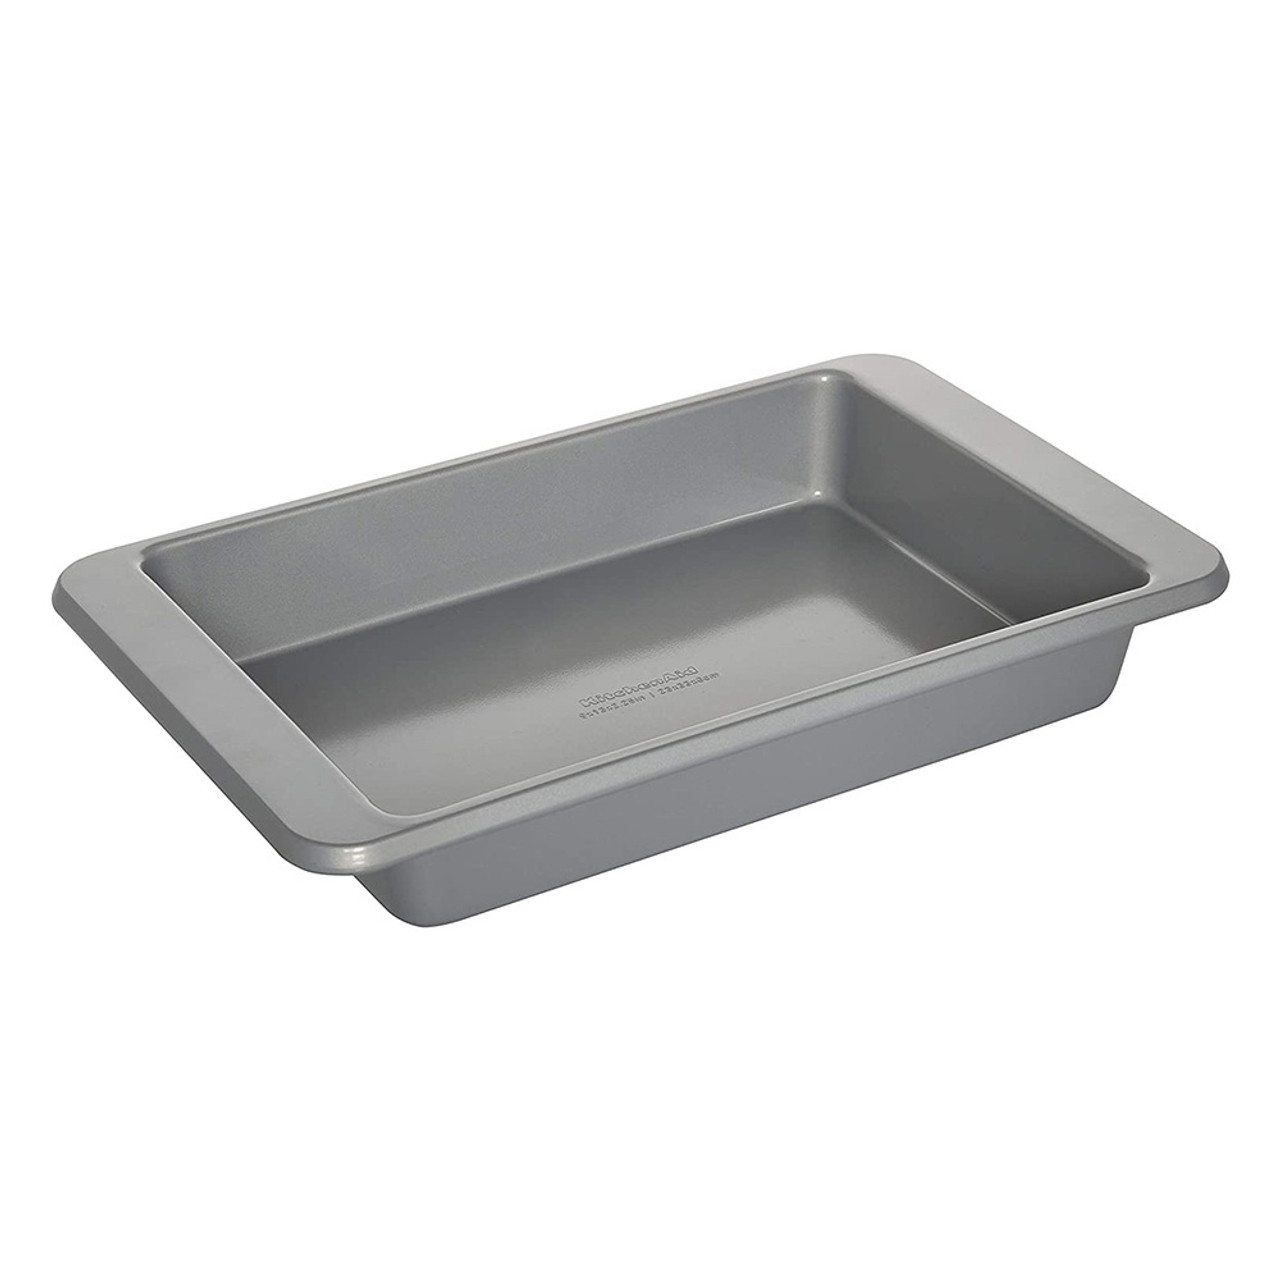 Good Cook 15 Inch x 14 Inch Cookie Sheet, gray (04023)